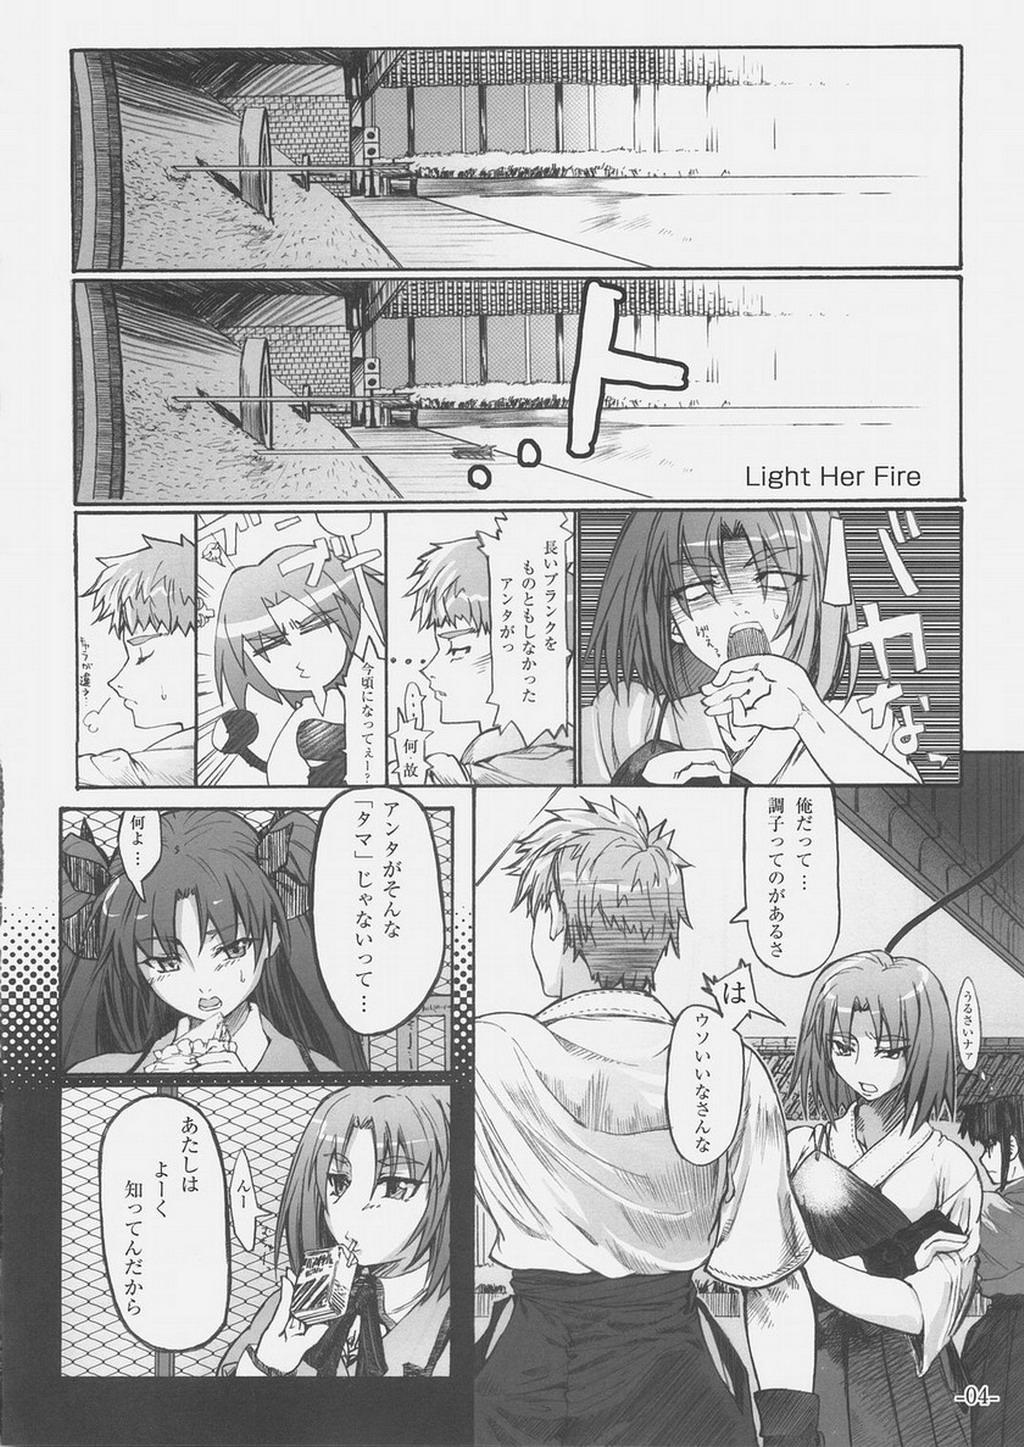 Step Mom Light Her Fire! - Fate stay night Blow Job - Page 3